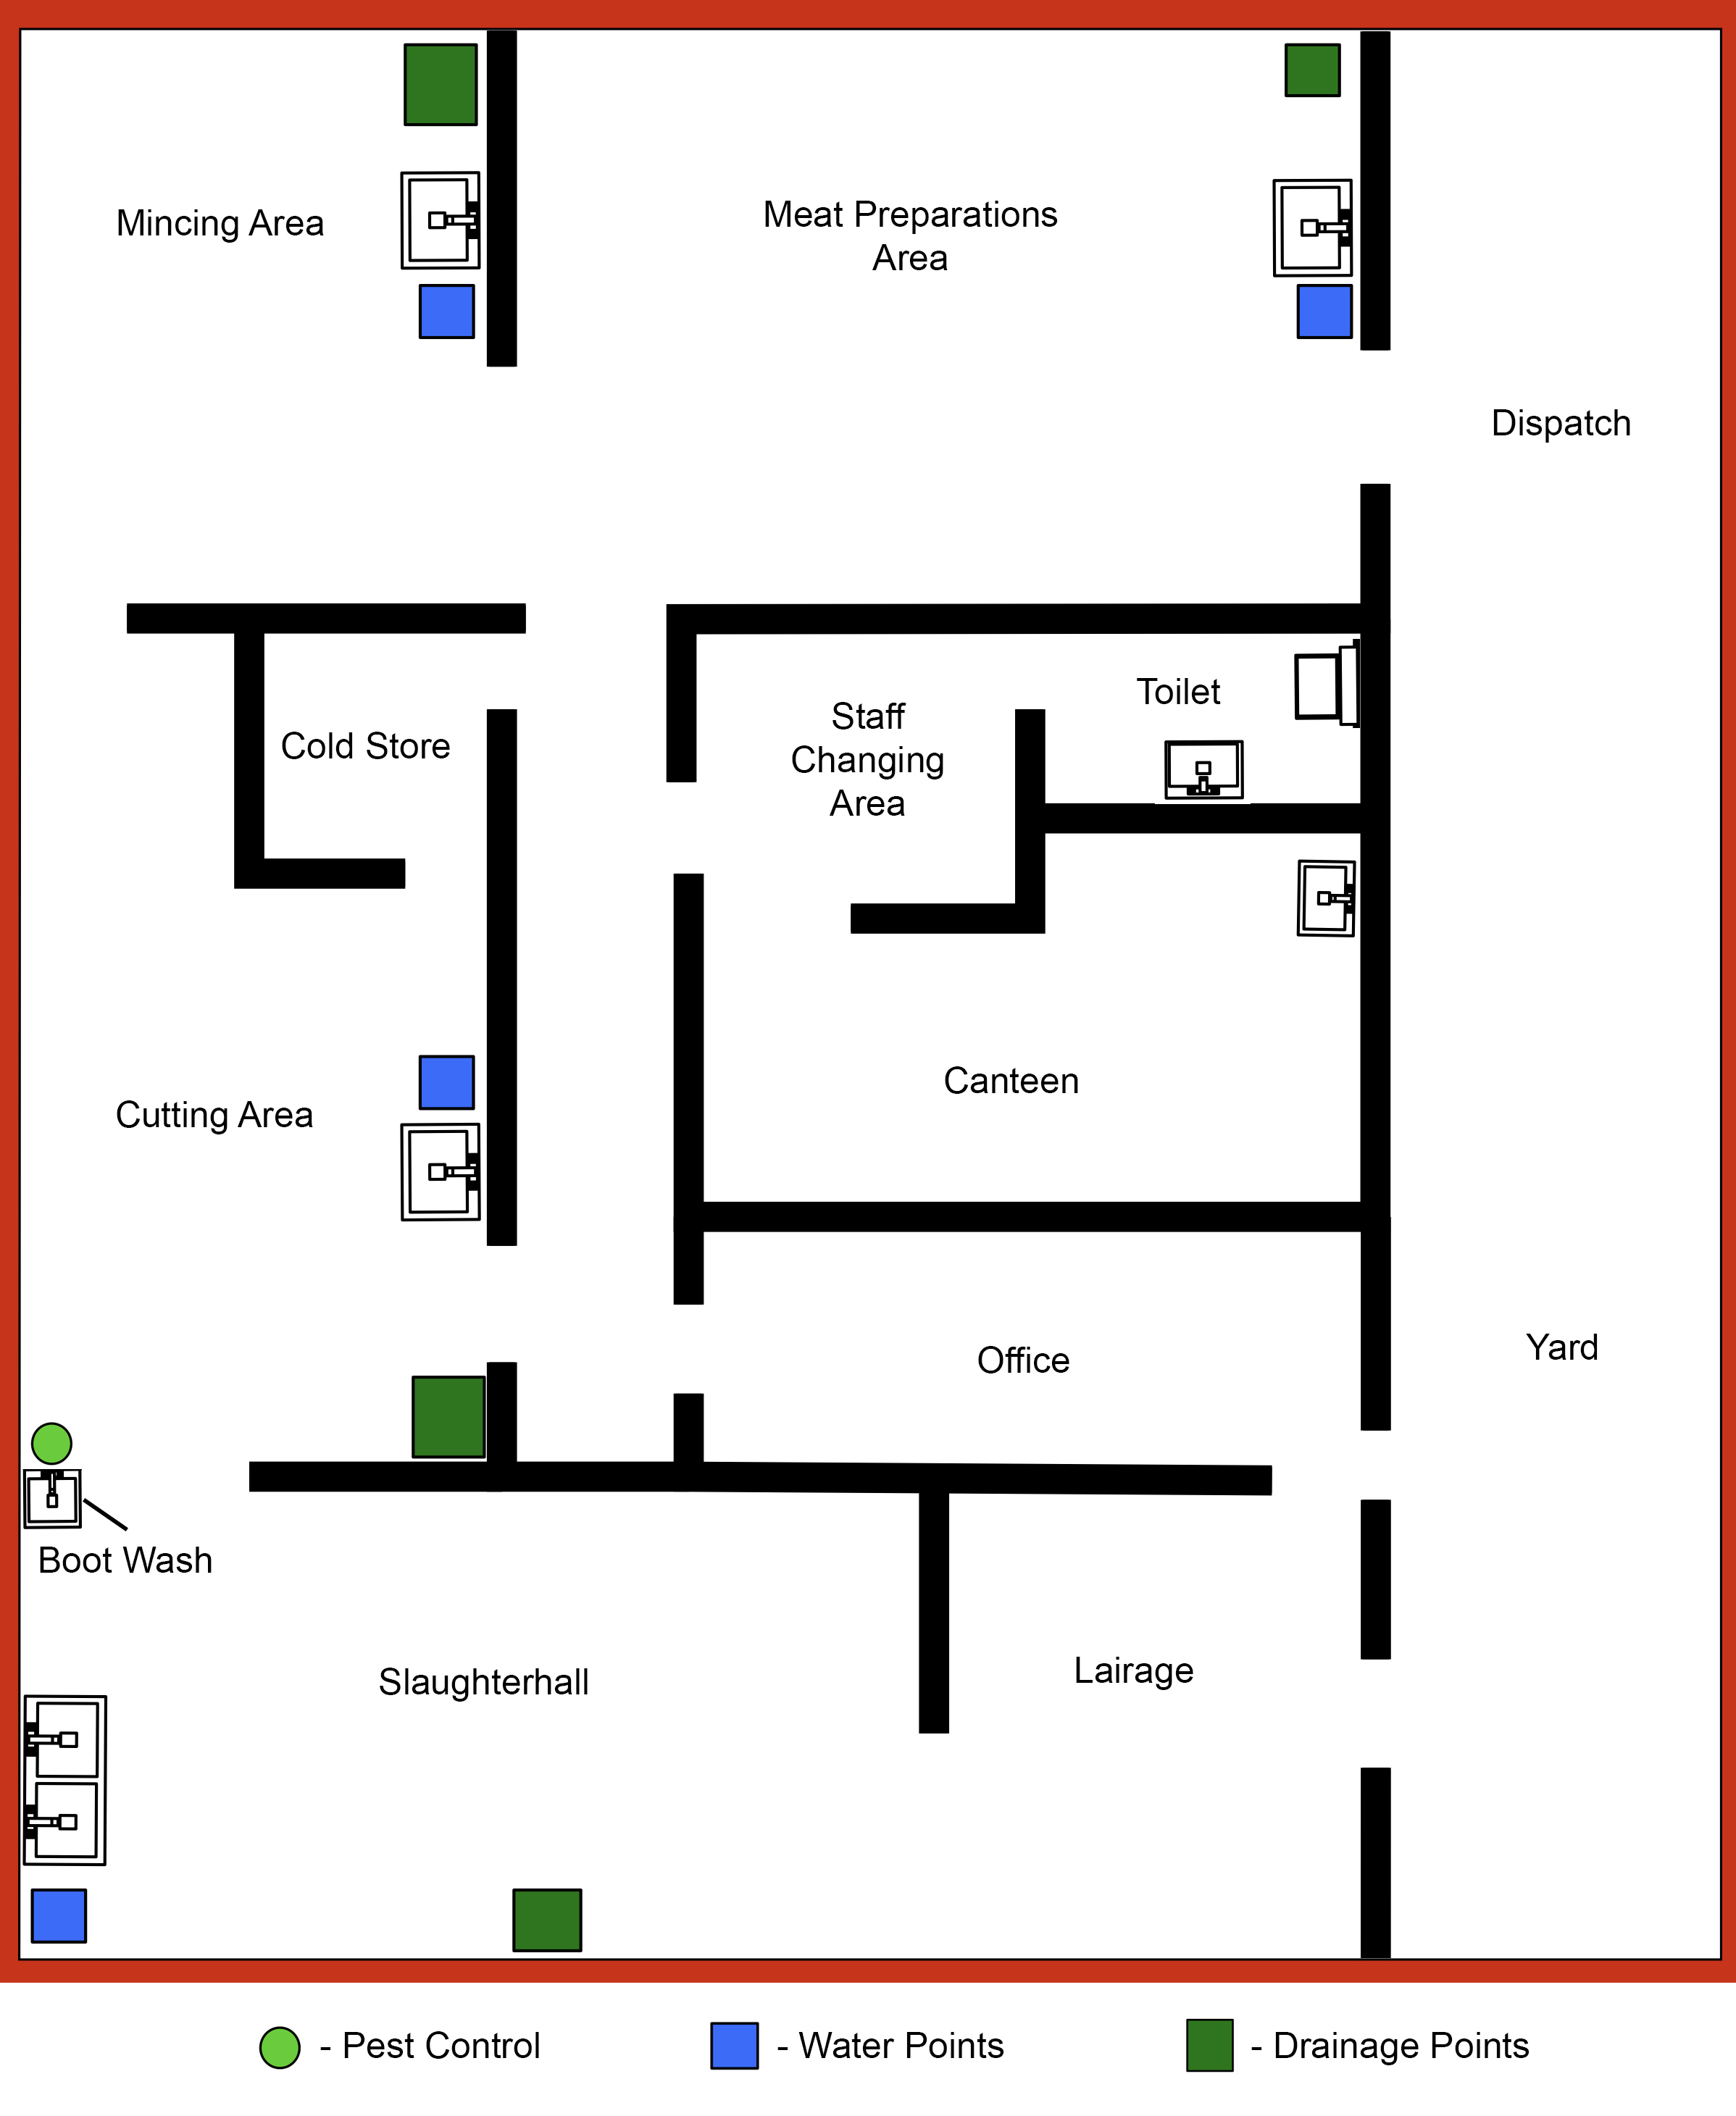 Layout plan with red boundary encompassing all areas. Rooms outlined in black labelled mincing area, meat preparation area, dispatch, cold store, staff changing area, toilet, canteen, cutting area, canteen, slaughterhall, office, store, lairage and yard. Pest control, water and drainage points marked. 